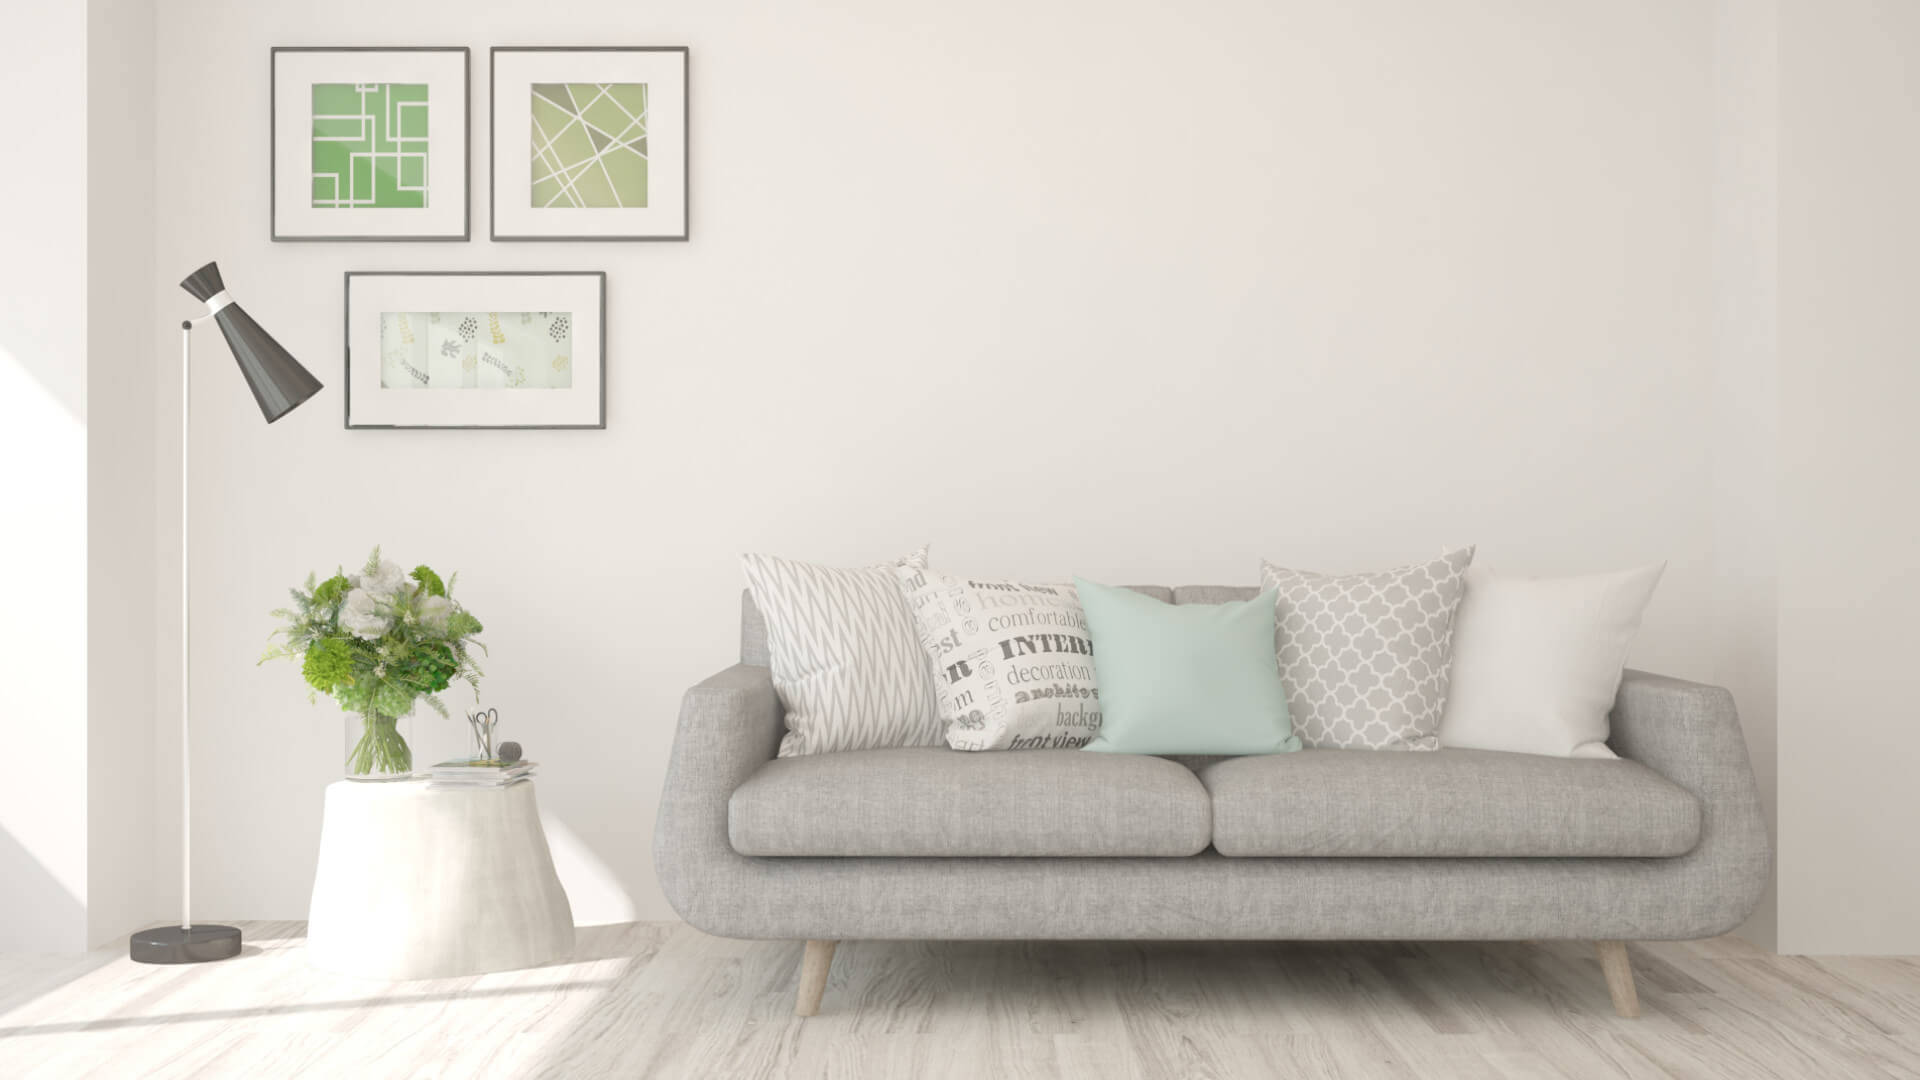 Home Interior Background With Green Sofa Table And Decor In Living Room  Stock Photo - Download Image Now - iStock